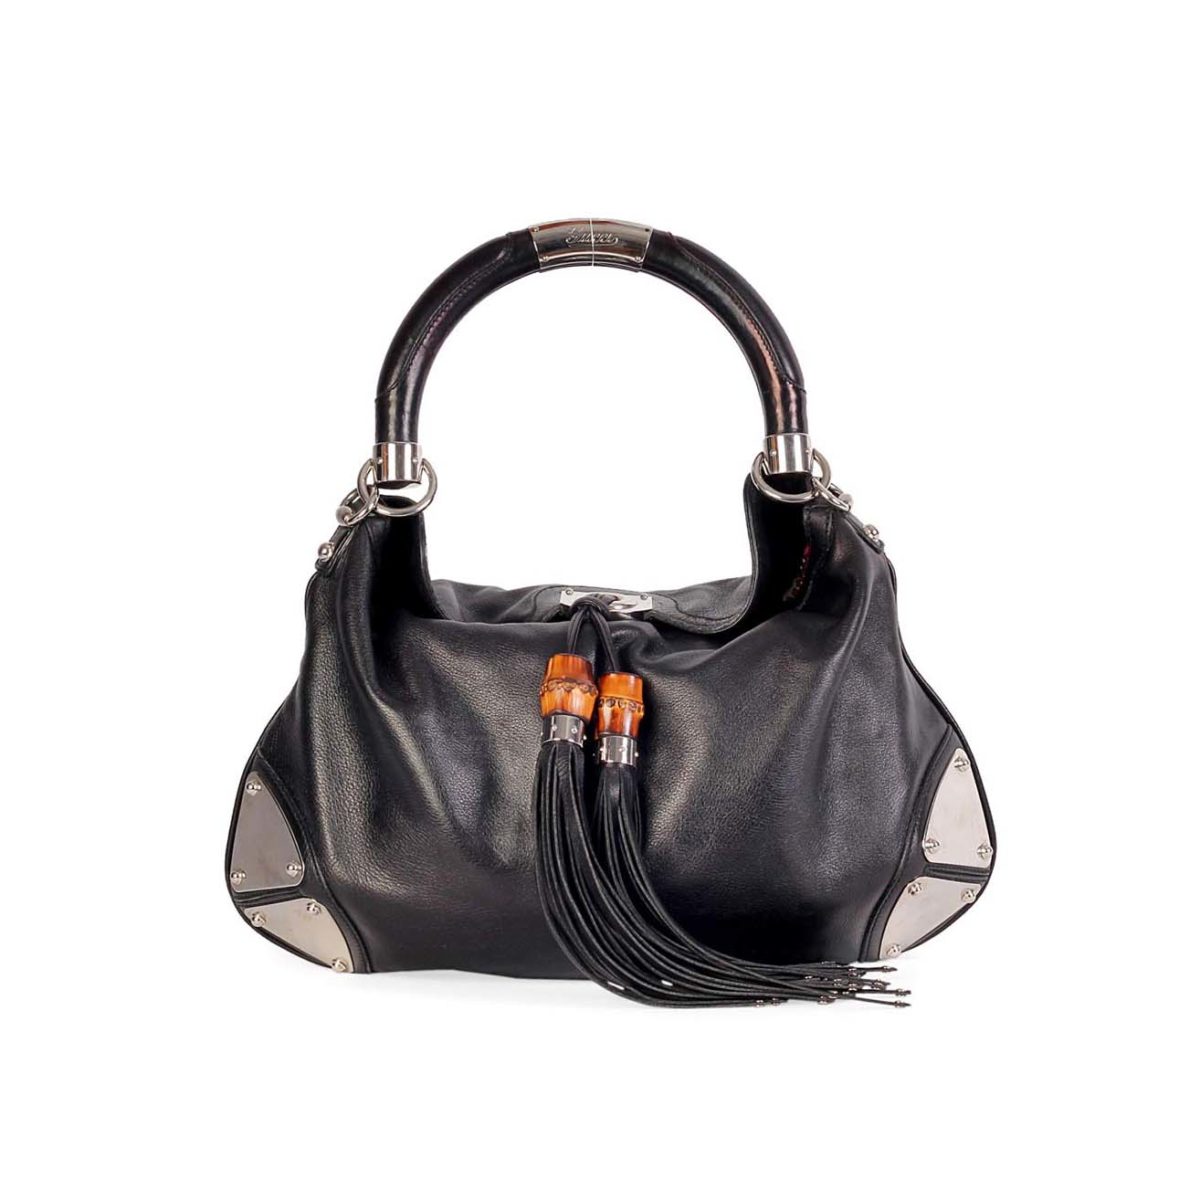 GUCCI-Indy-Leather-Hobo-Tassel-Bag-Front-1200x1200